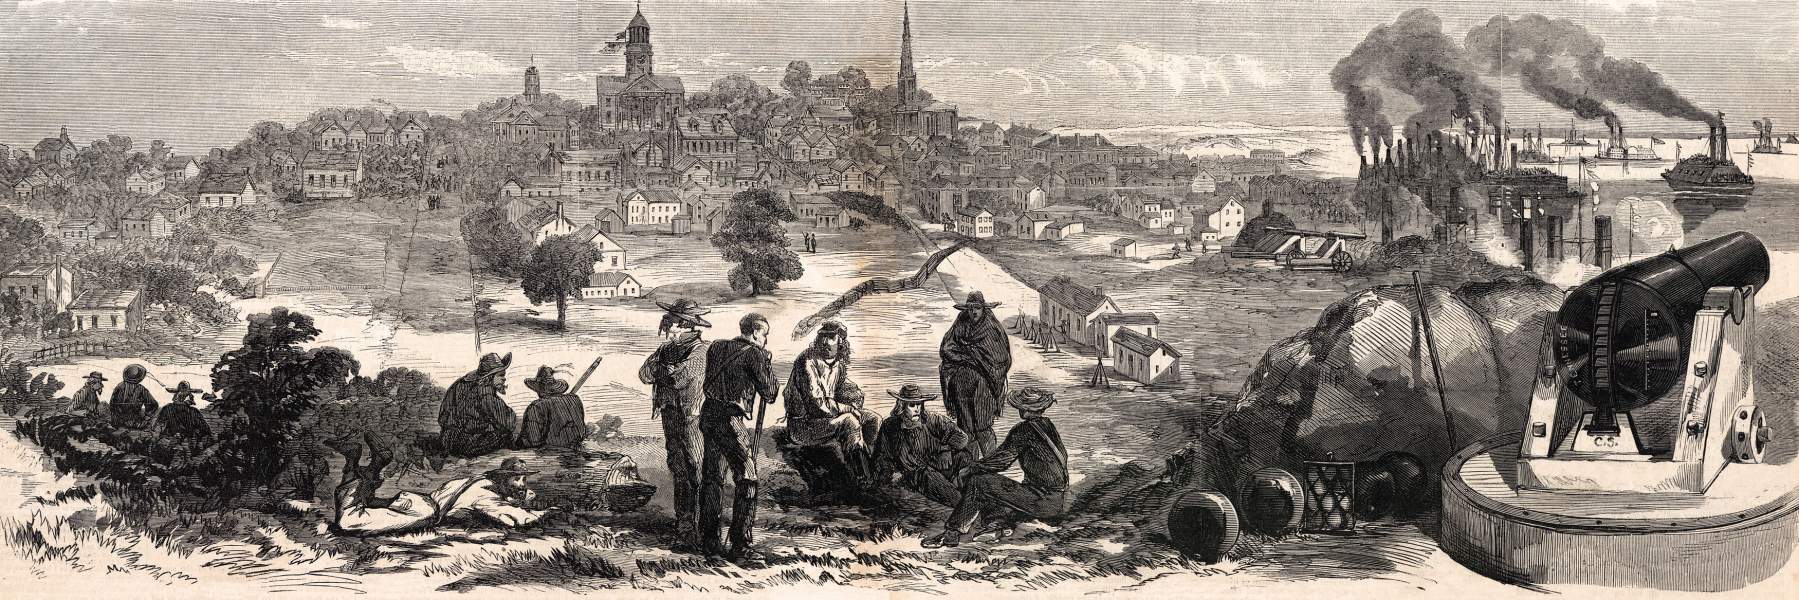 View of Vicksburg, Mississippi after the surrender, July 1863, artist's impression, zoomable image